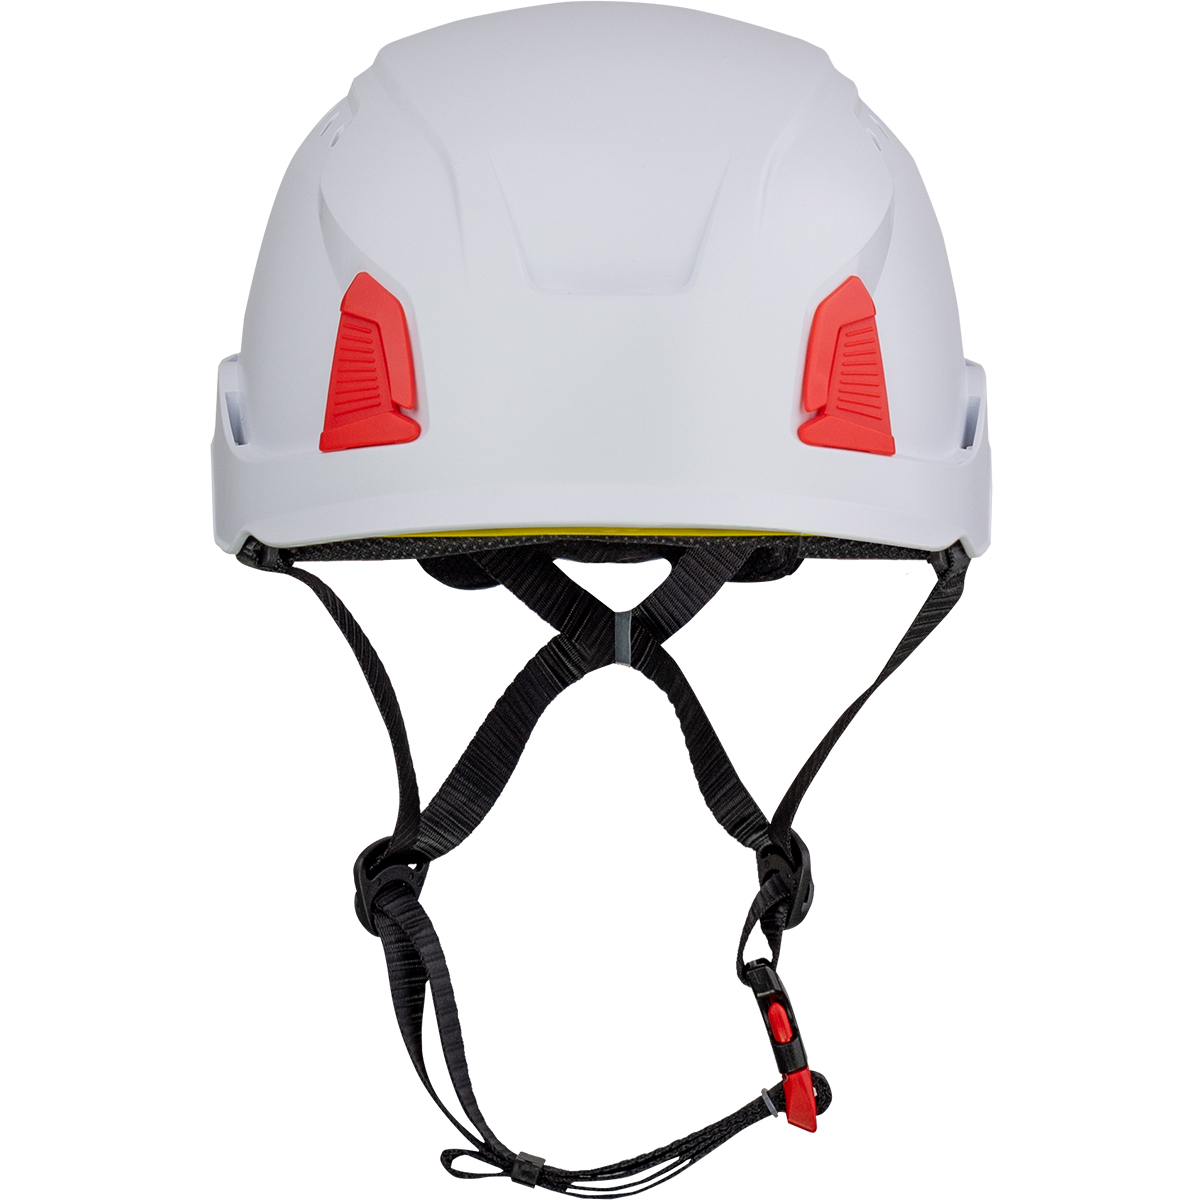 PIP® 280-HP1491RVM-01 Traverse™ Vented, Industrial Climbing Helmet with Mips® Technology, Polycarbonate/ABS Shell, EPS Foam Impact Liner, HDPE Suspension, Wheel Ratchet Adjustment and 4-Point Chin Strap, White